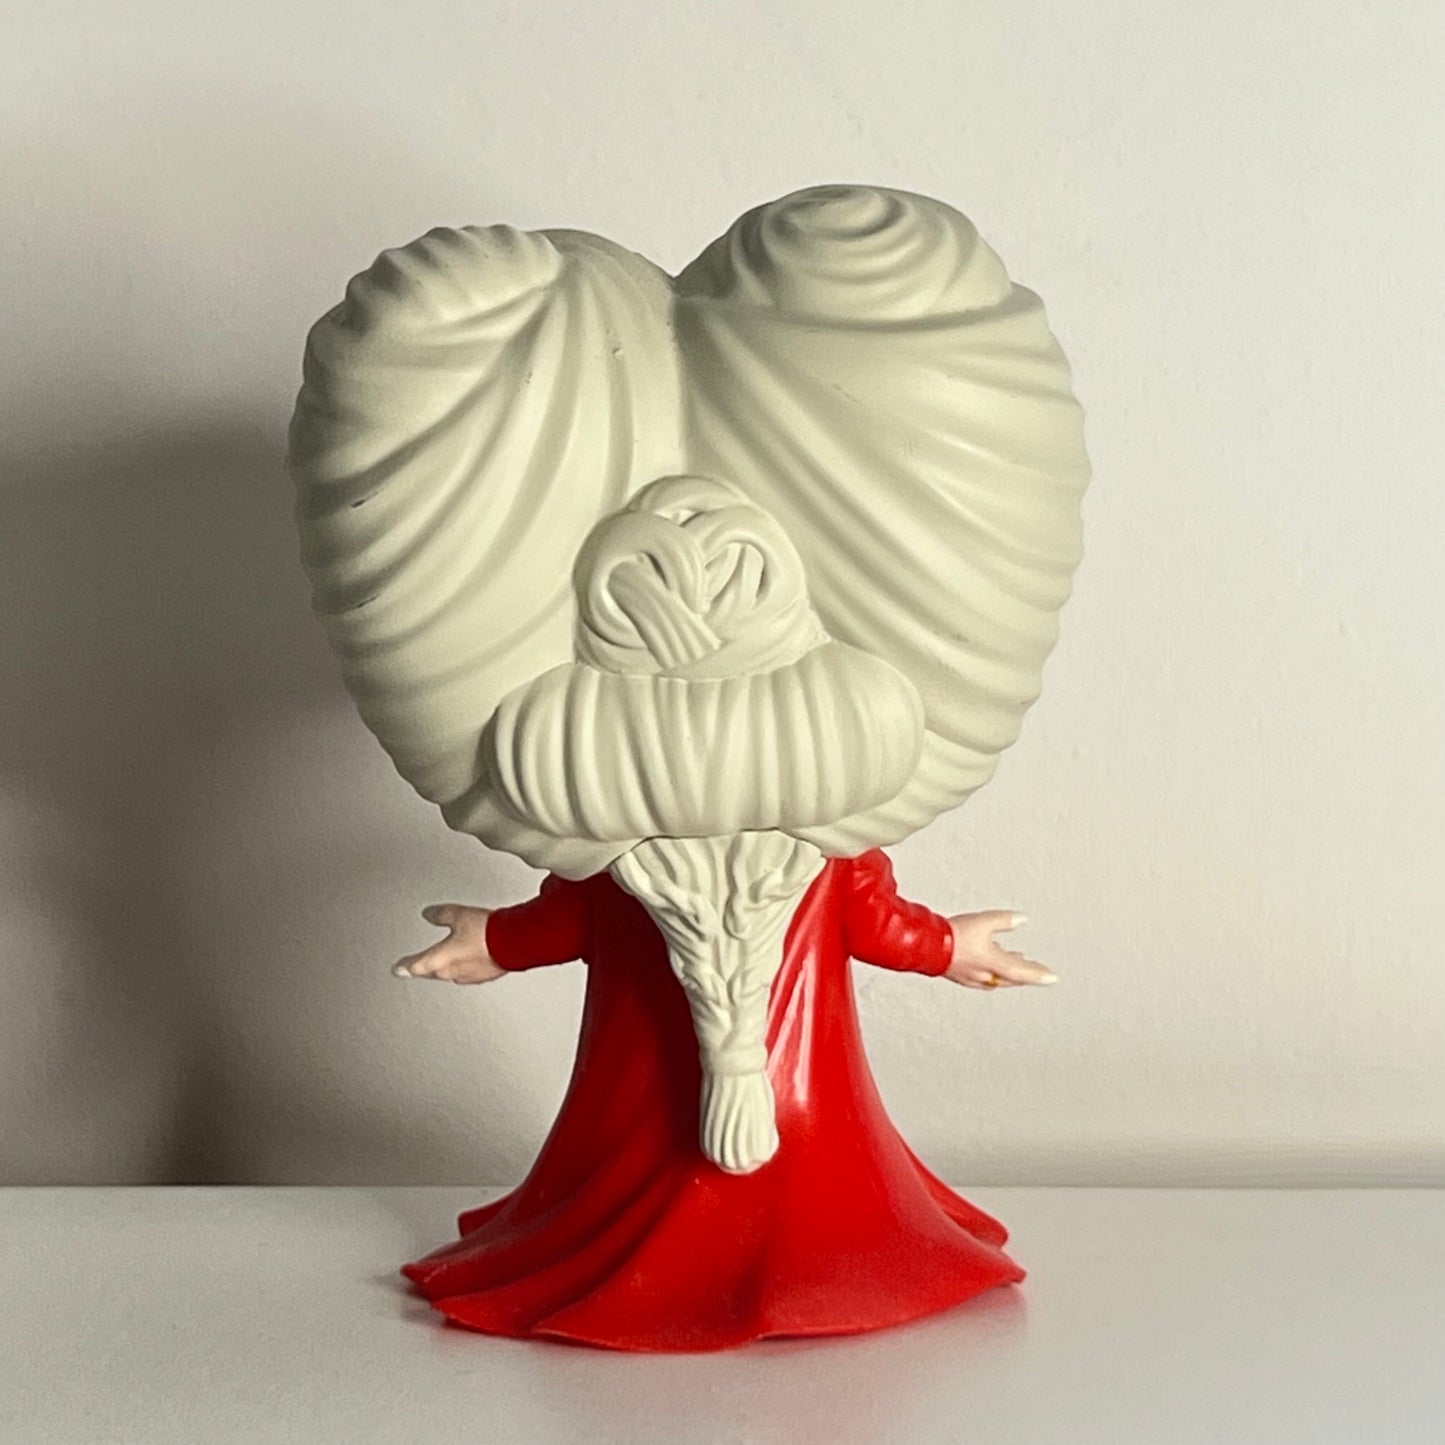 Bram Stokers Dracula - Count Dracula 1073 Funko Pop (No Box or Insert Included)